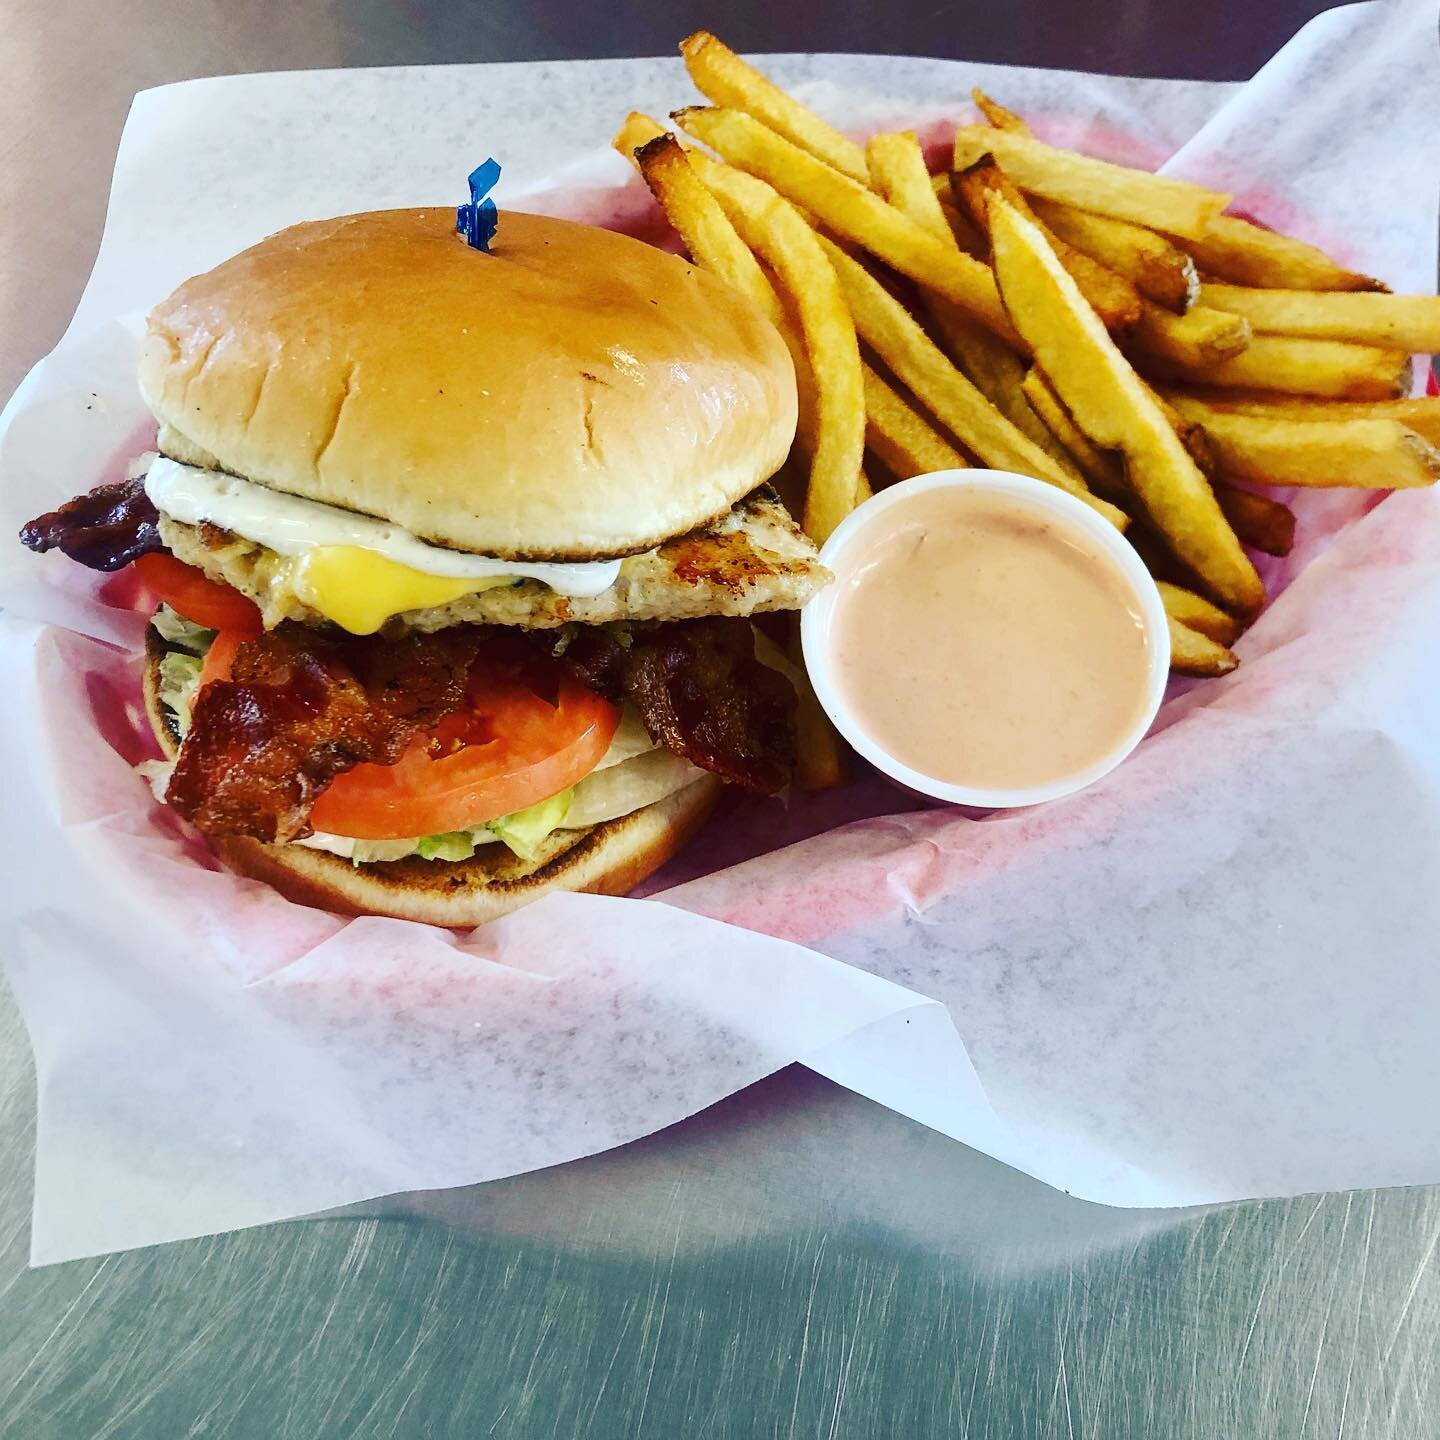 This cold weather has us thinking about our favorite hot sandwiches and if you haven&rsquo;t tried the Grilled Lemon Chicken Supreme, you&rsquo;re in for a treat! Bacon, cheese, lettuce, tomato, a tangy lemon pepper sauce and hot grilled chicken brea